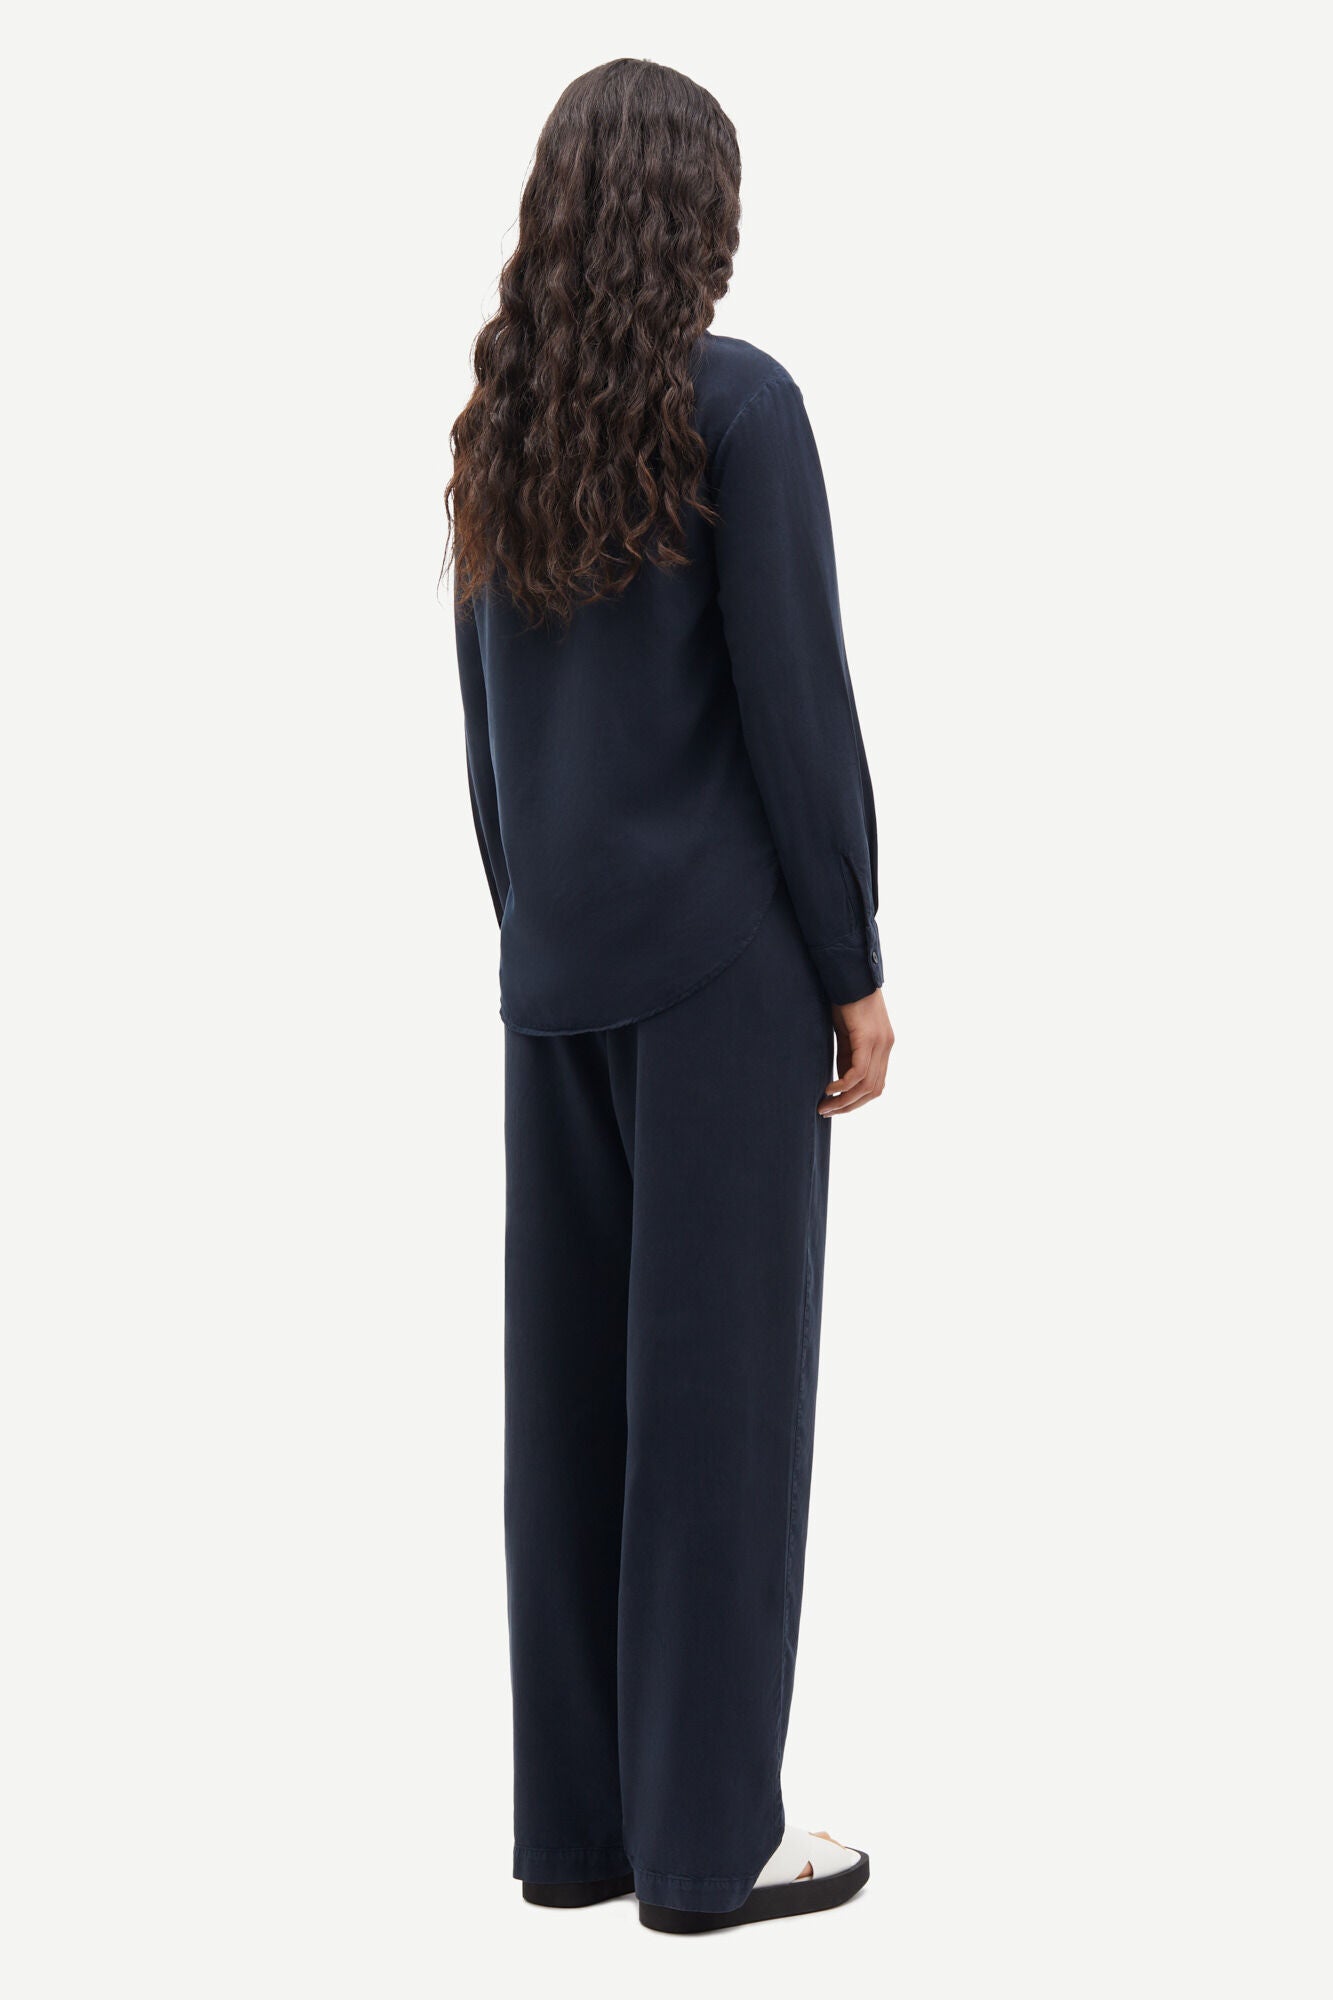 Straight leg navy trousers with elasticated waistband and drawstring